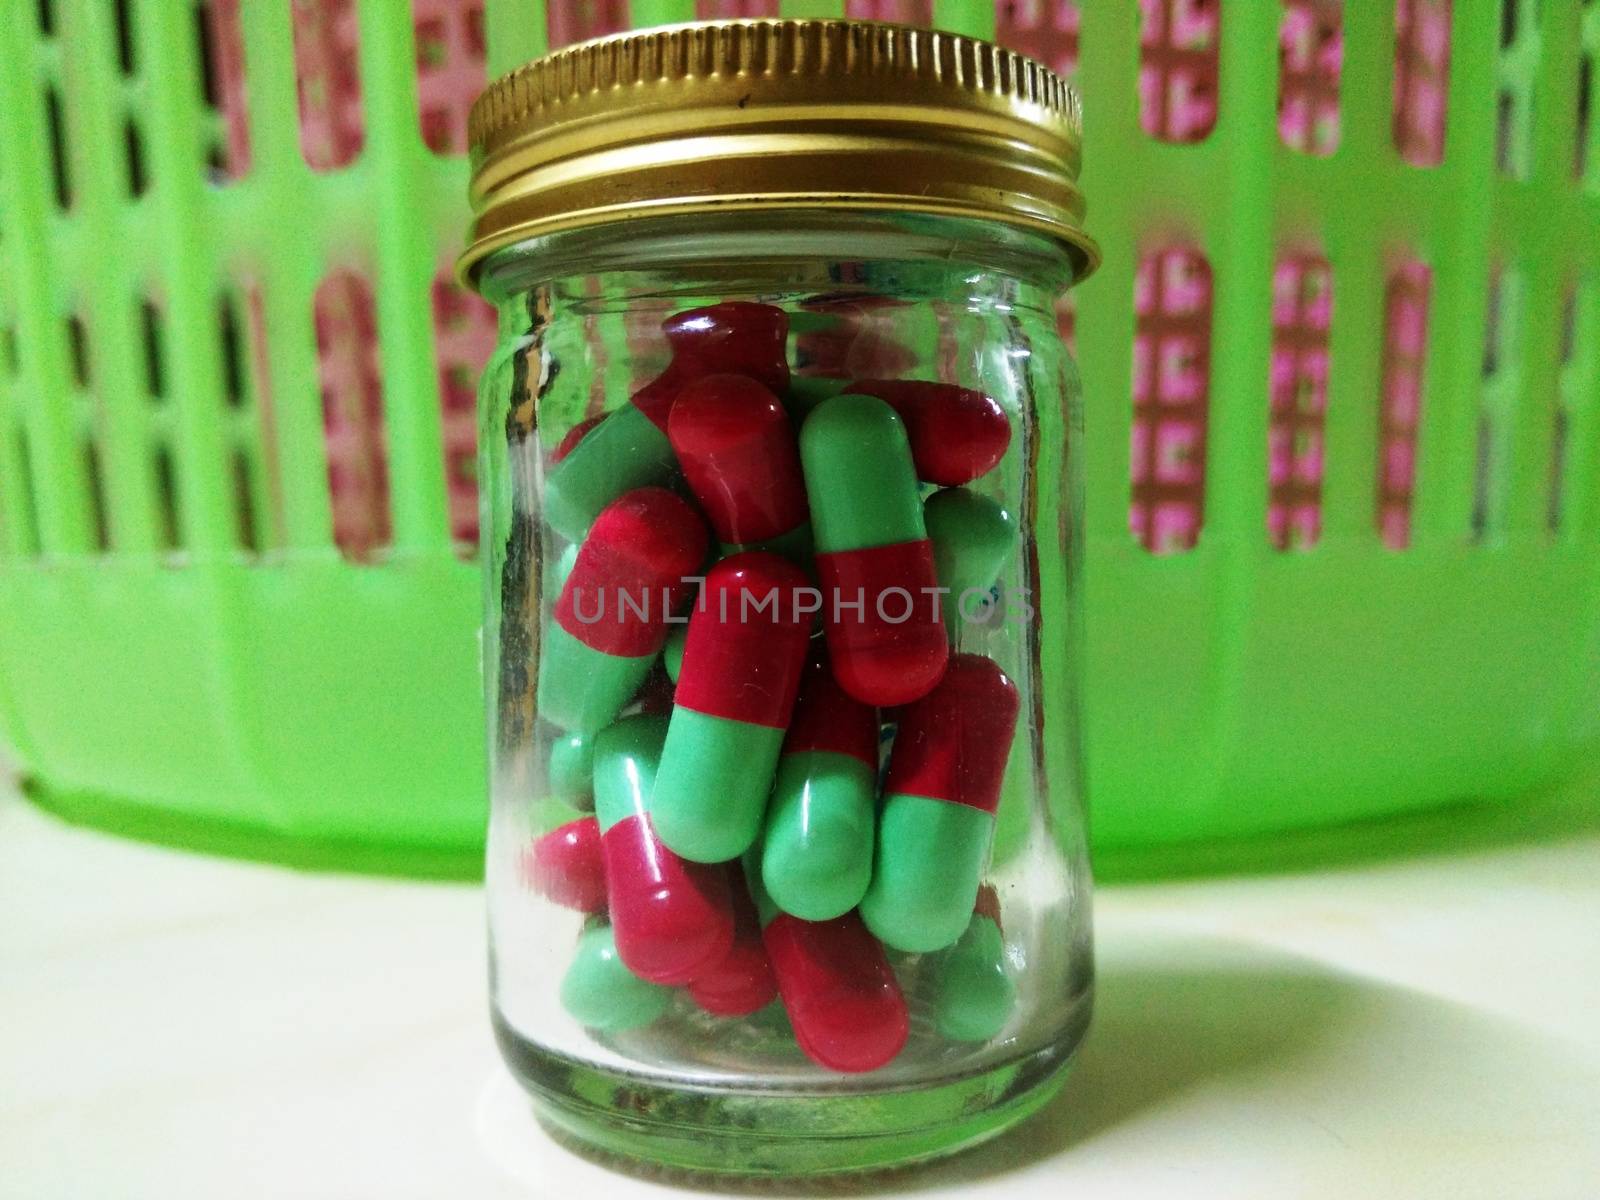 Red and Green Capsule in the Bottle